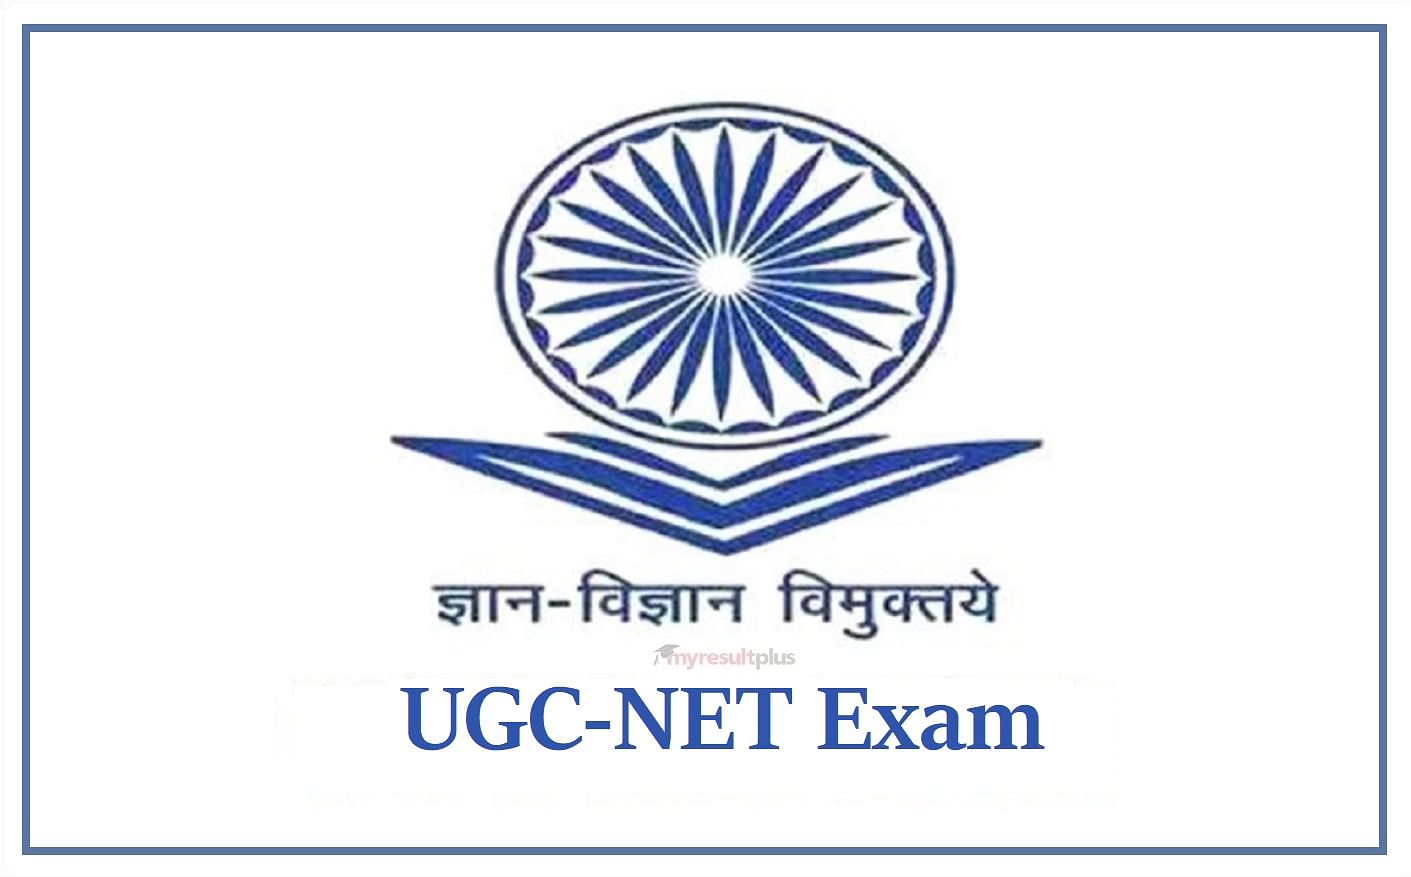 NTA to Conduct UGC NET 2022 Exam Likely in June, Check Updates Here